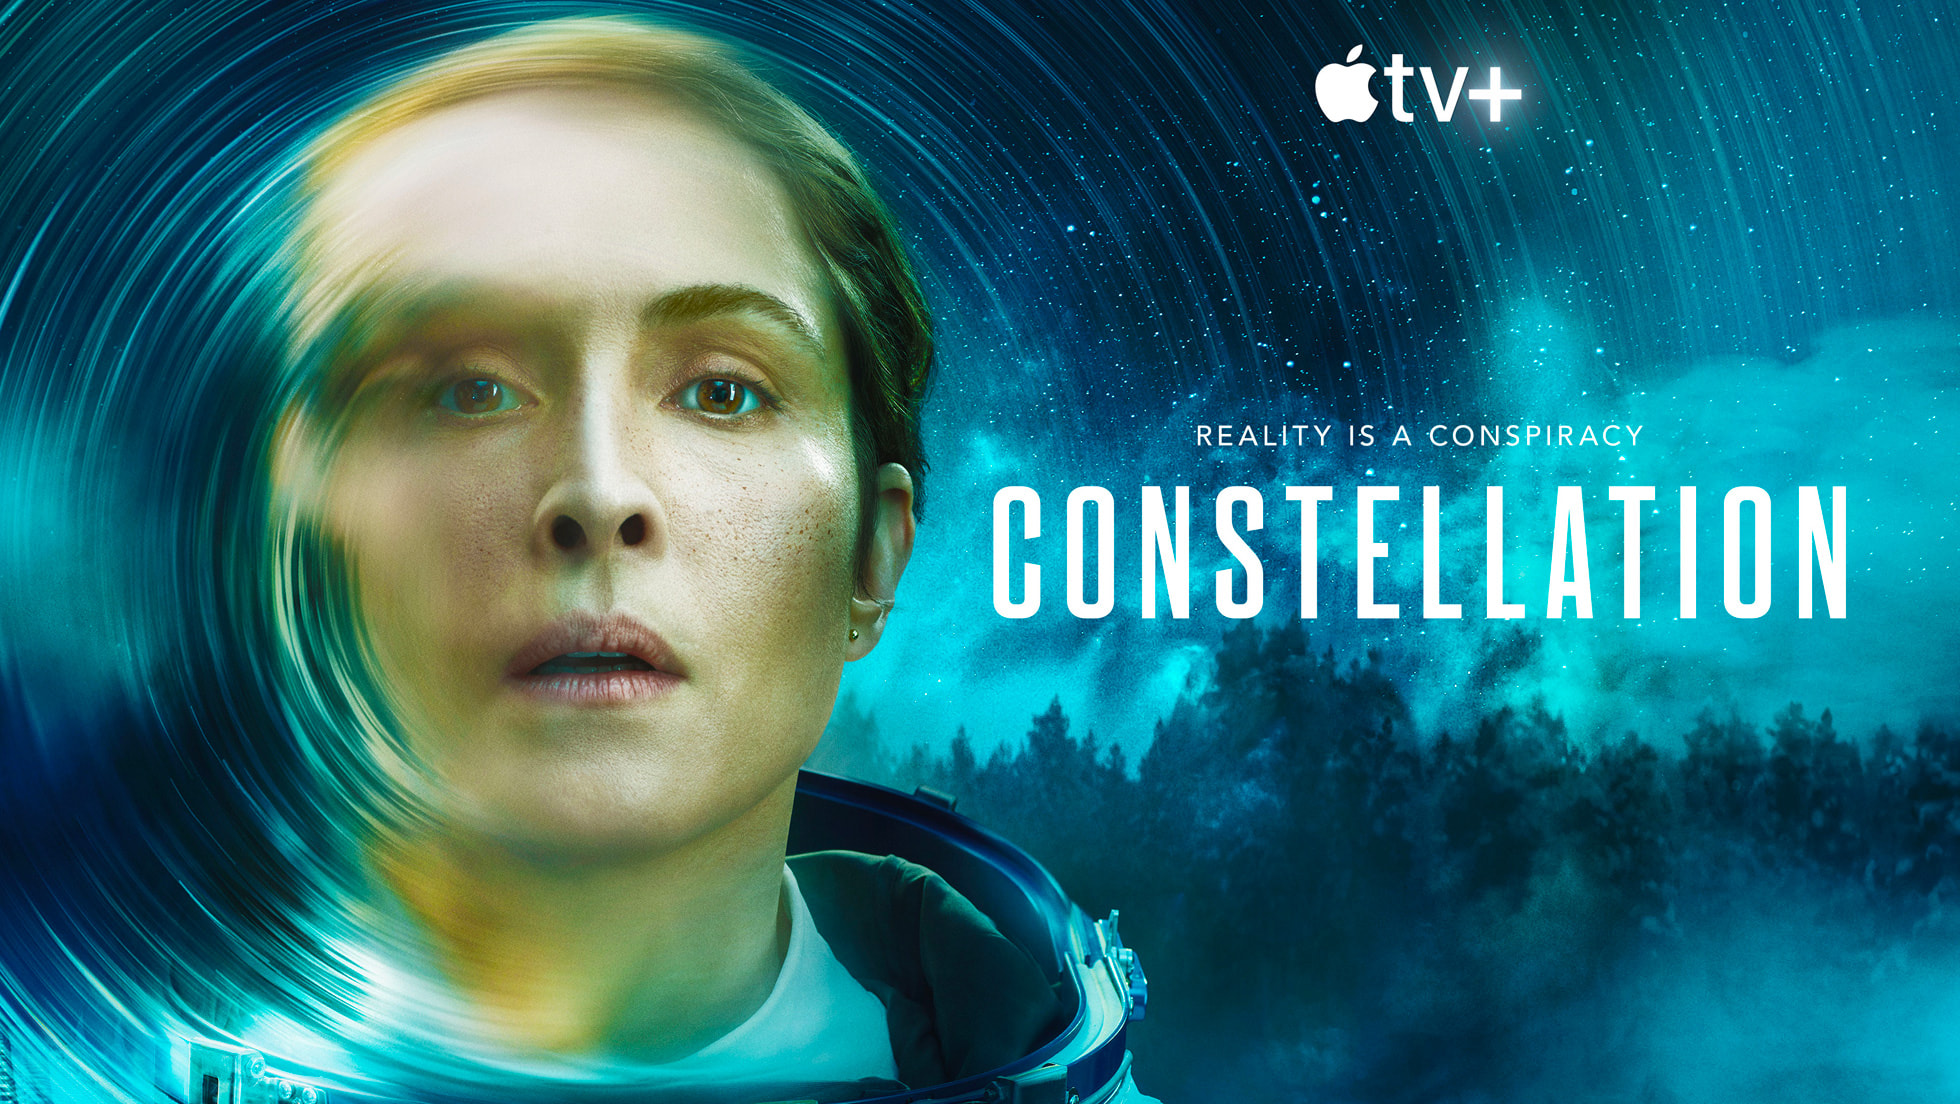 “Constellation” Apple + Trailer Released Starring Noomi Rapace and Jonathan Banks